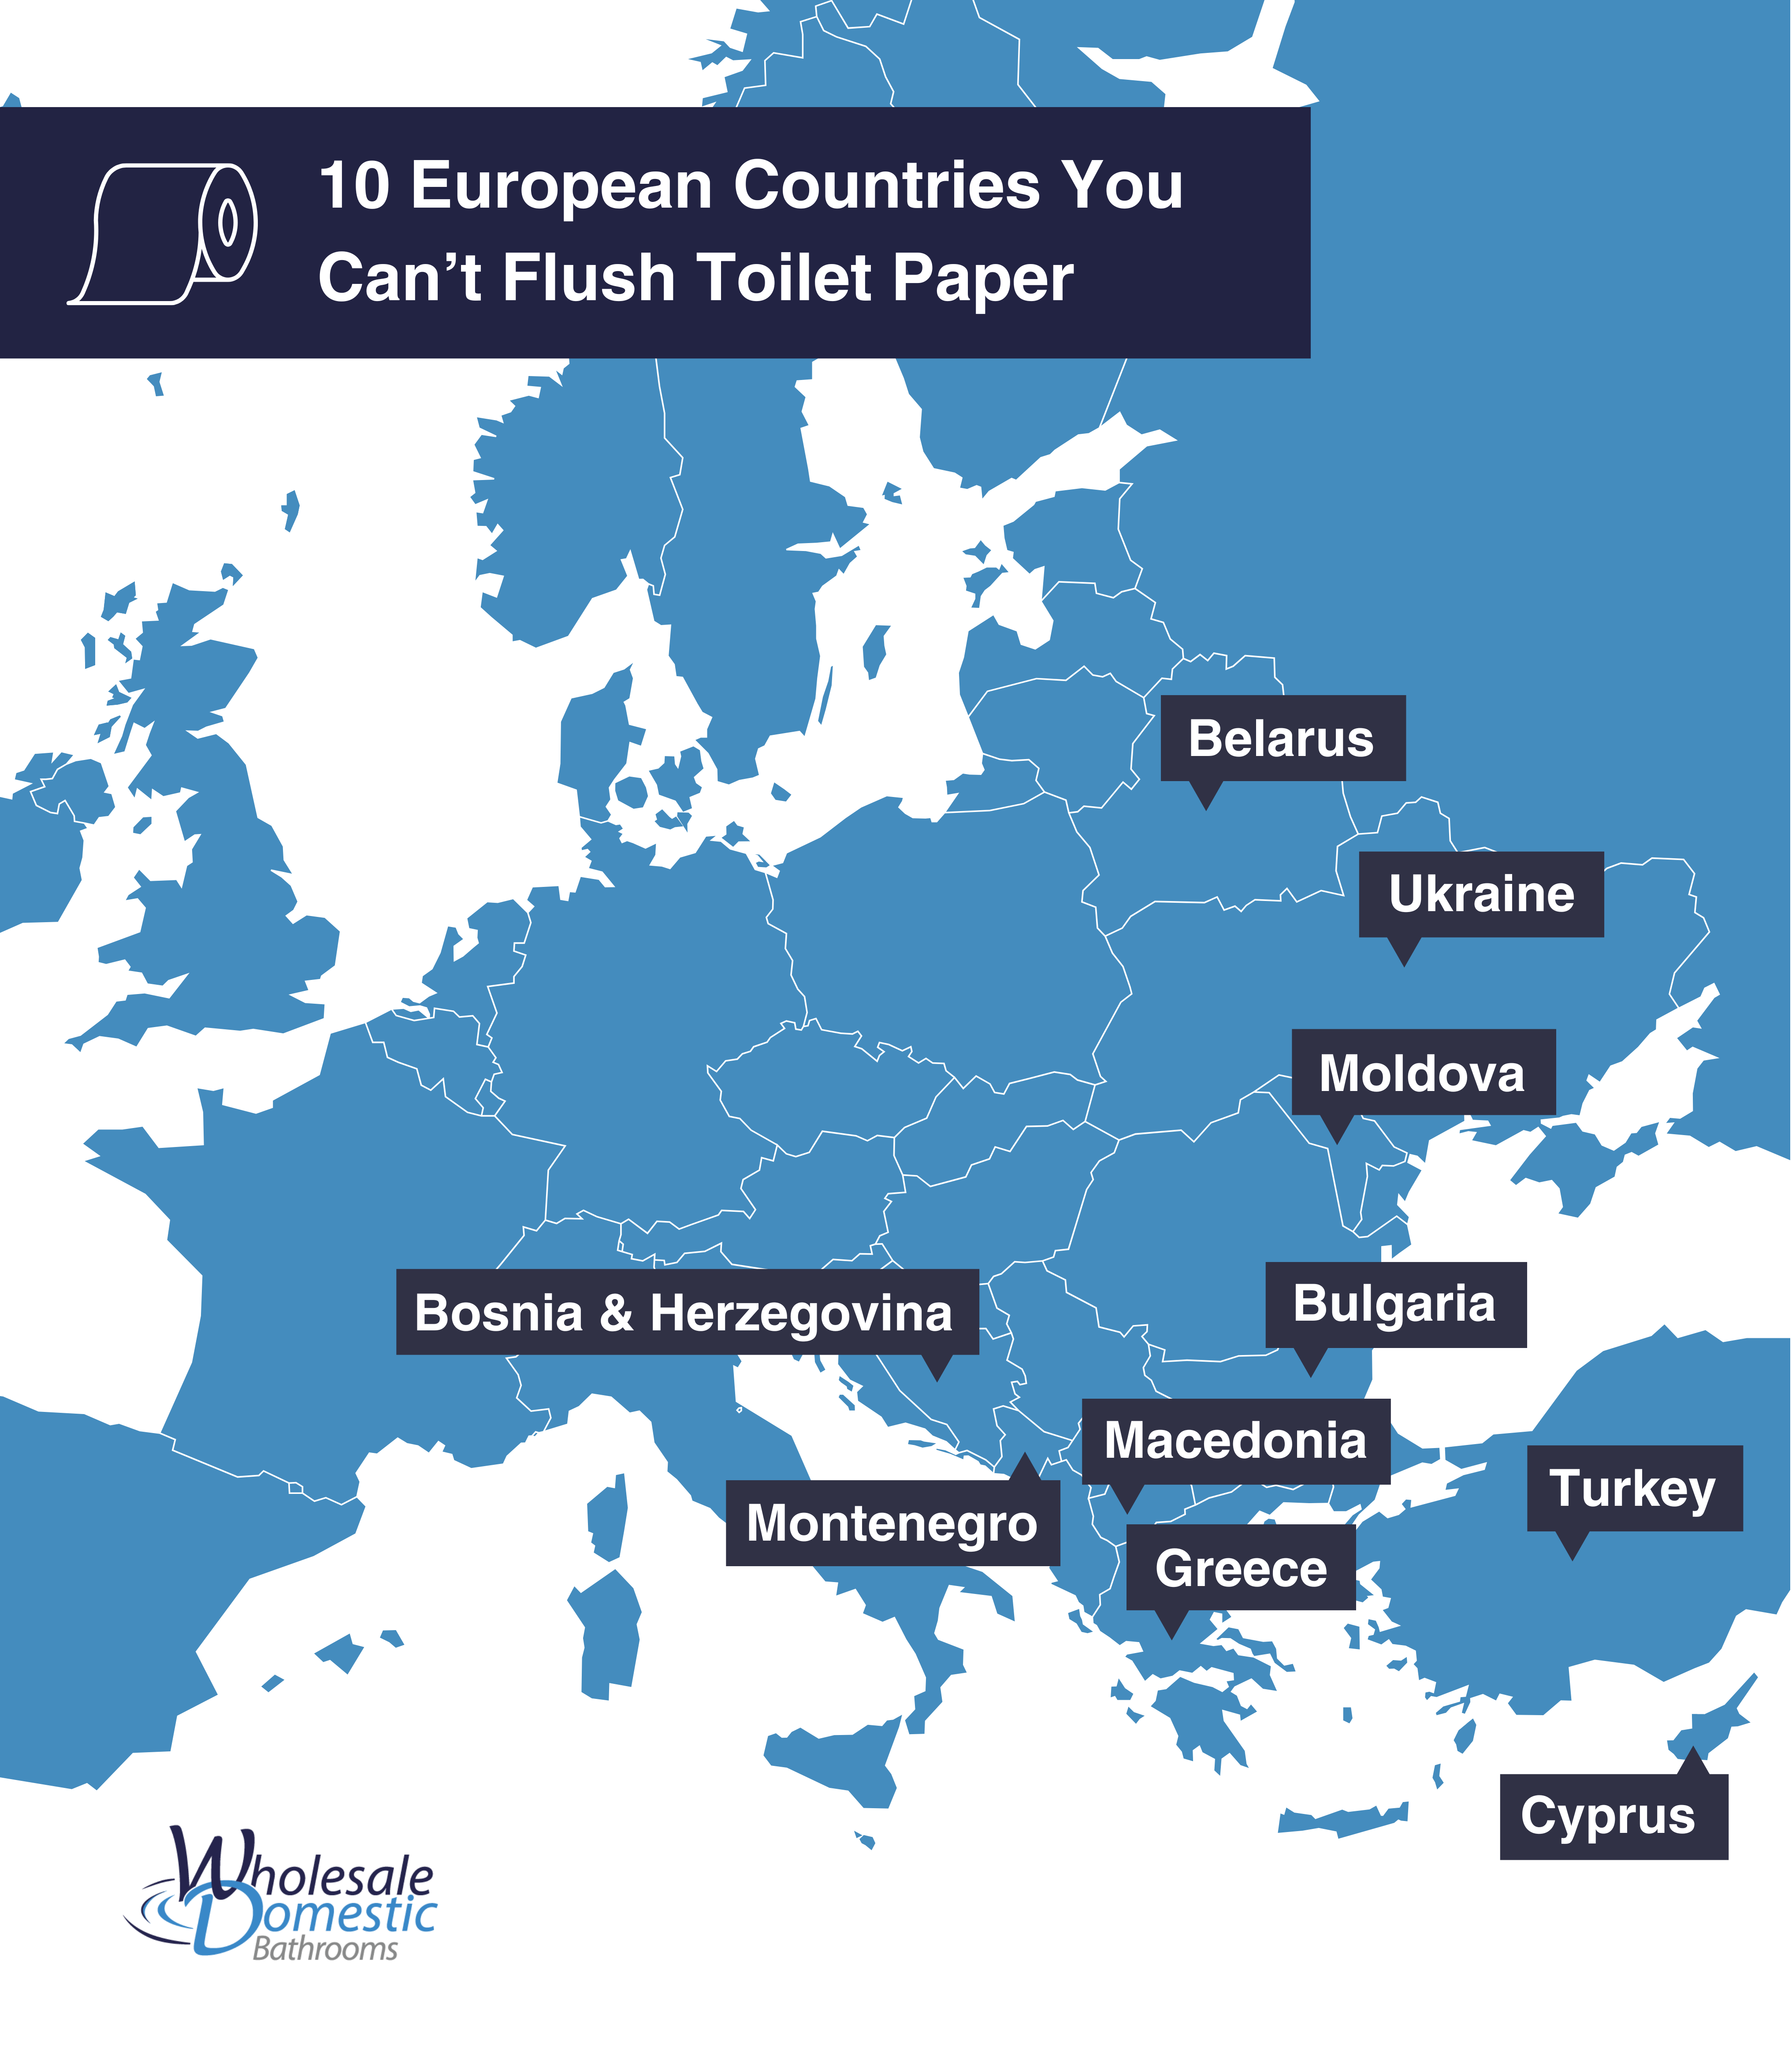 Map of countries in Europe showing where you can't flush toilet paper